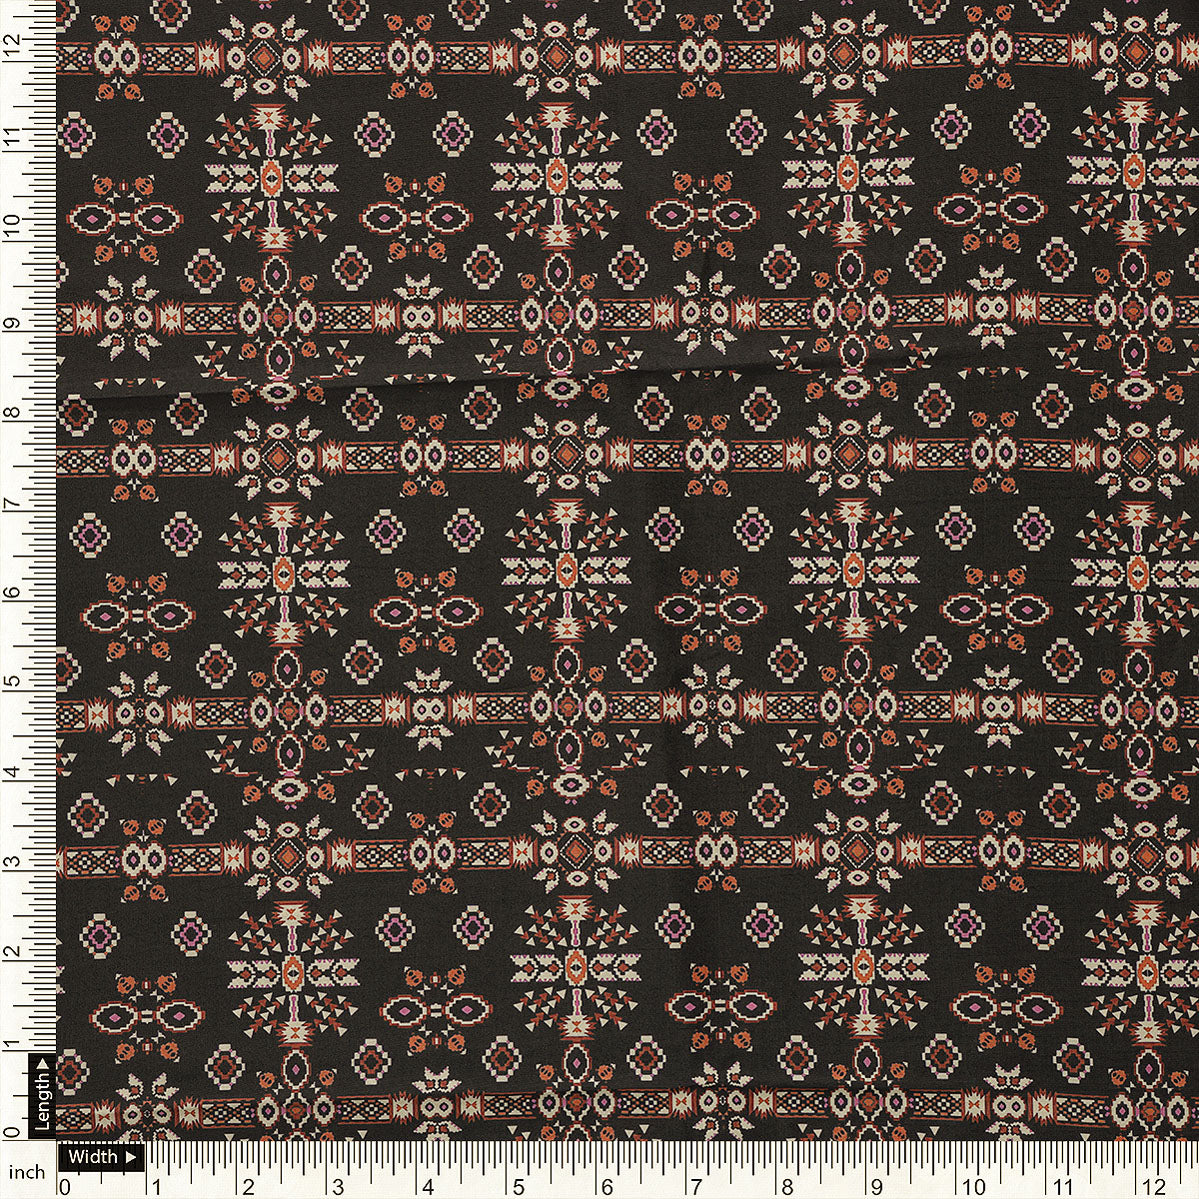 Invigorate Your Wardrobe with Muslin Fabric in Black Ajrakh Patterns